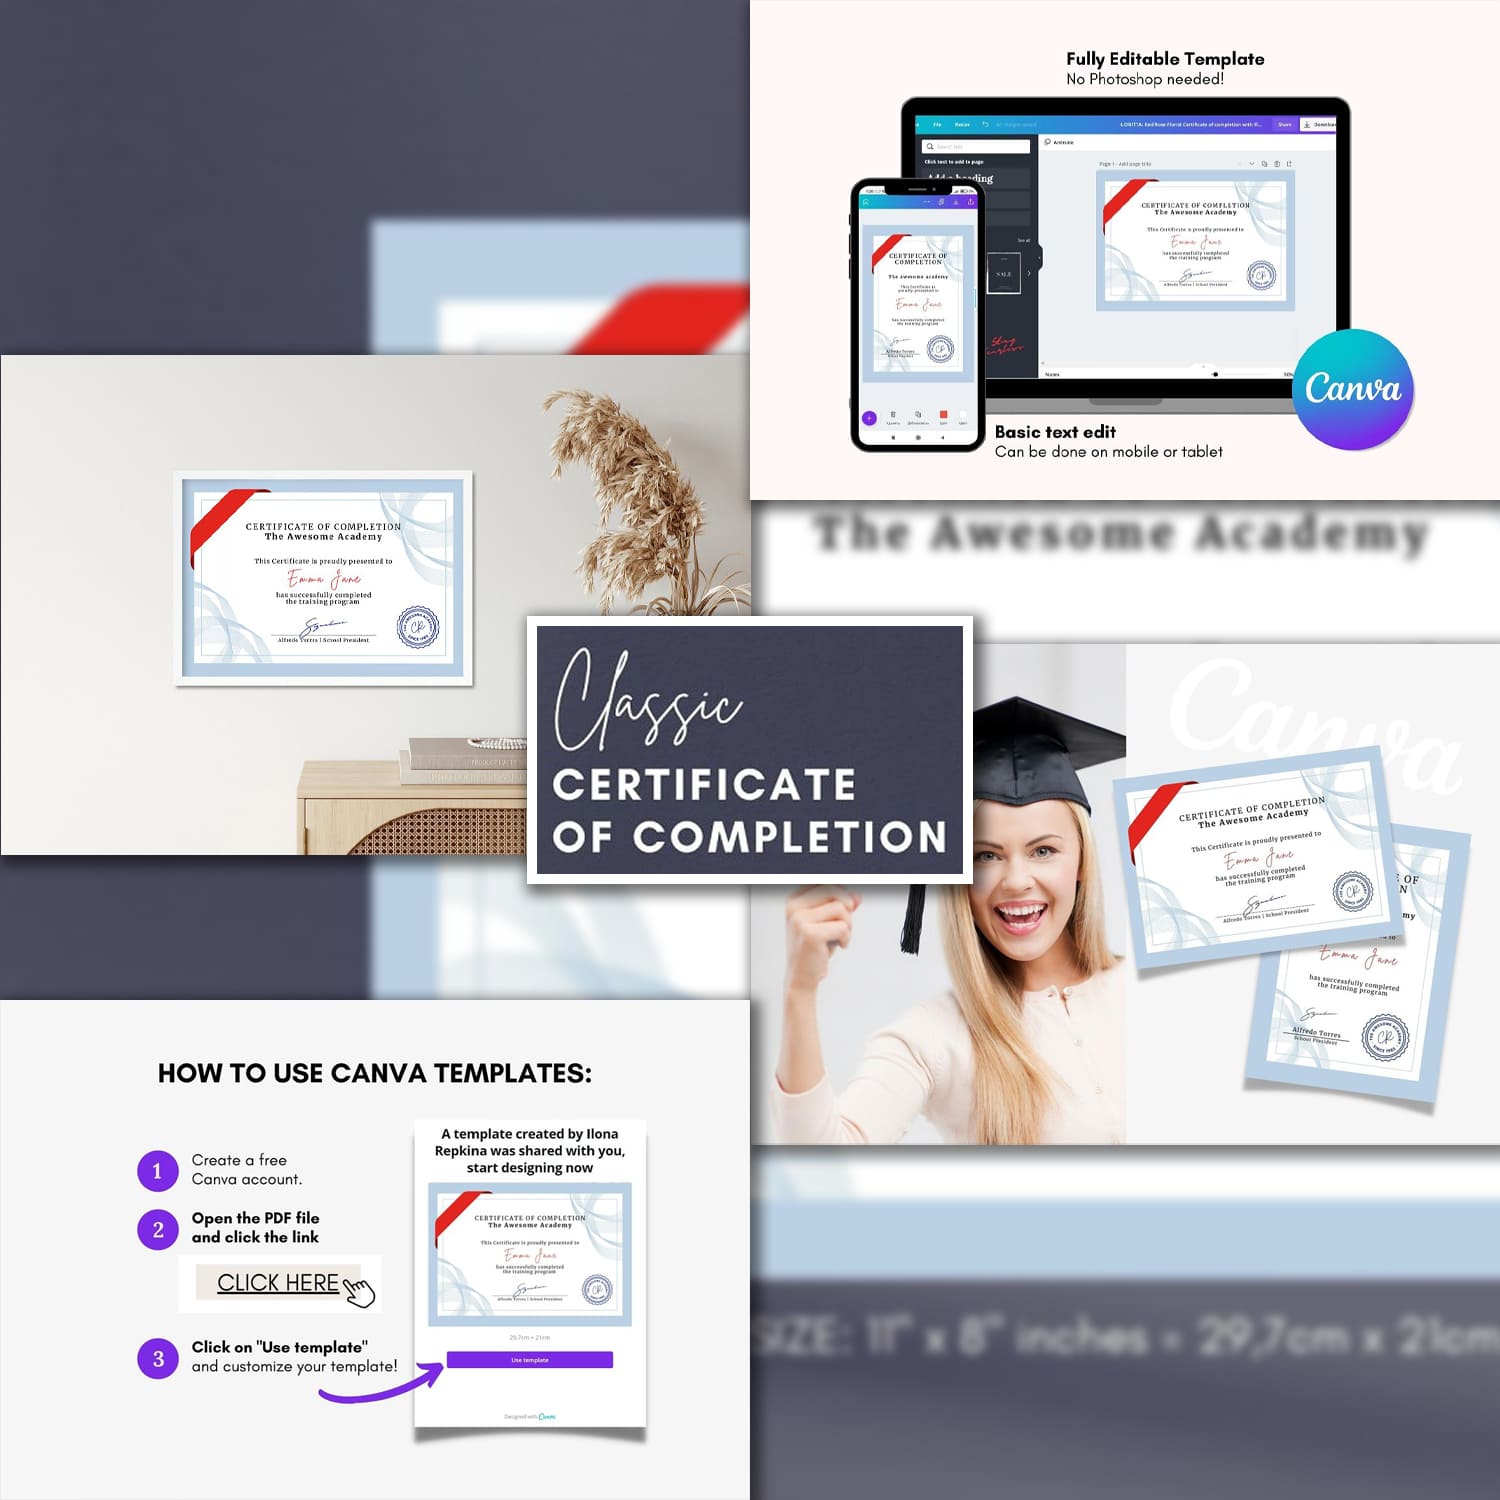 Classic Blue Certificate of Completion - 2 Editable Canva Templates.